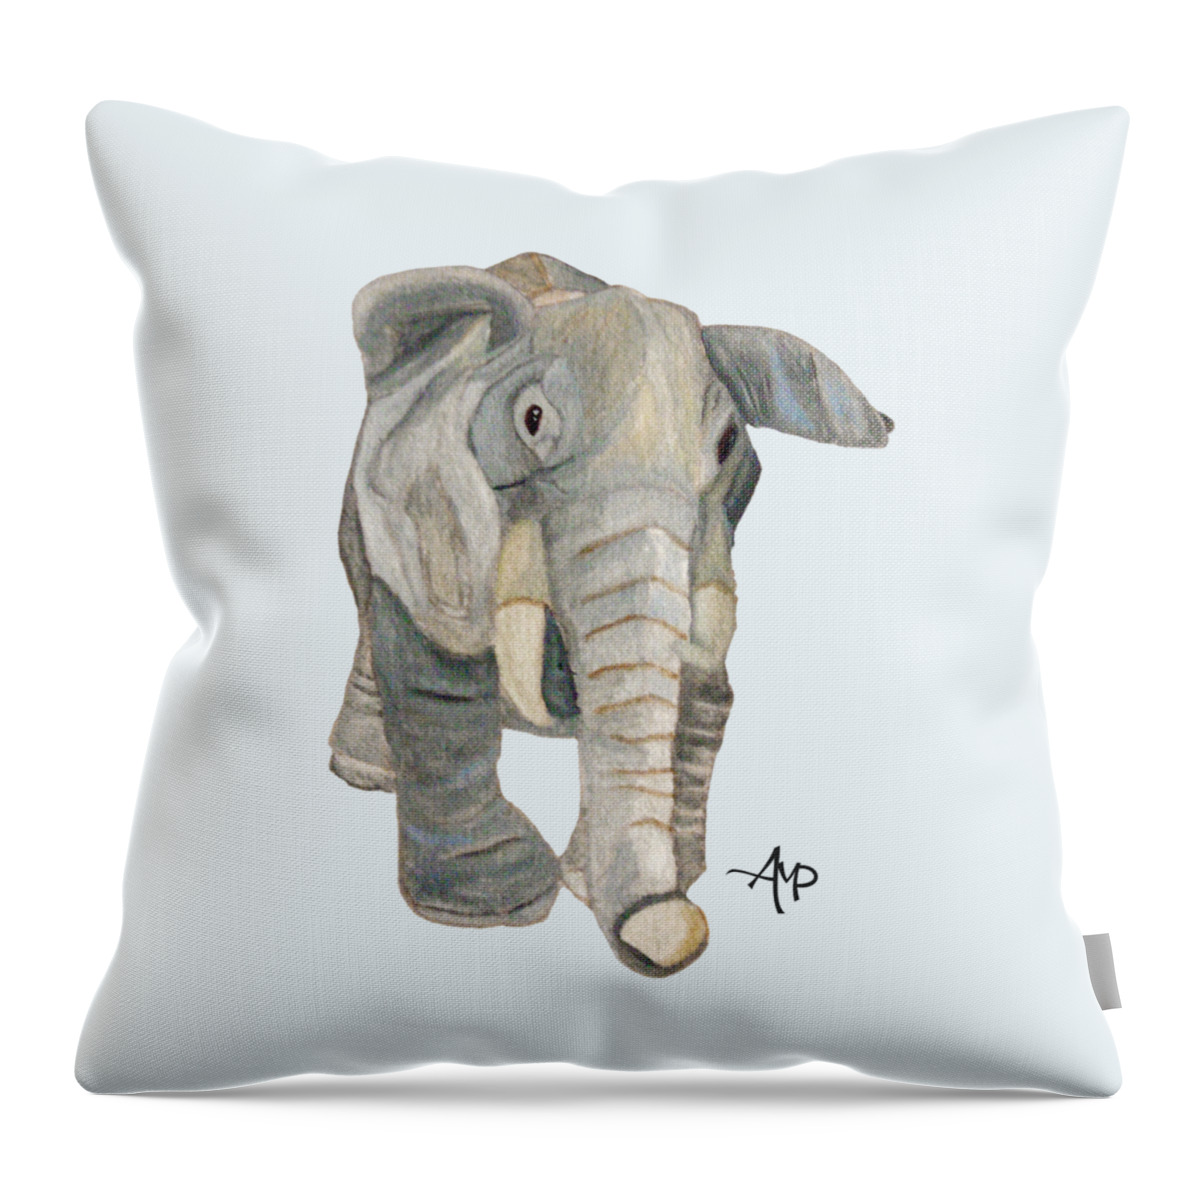 Elephant Throw Pillow featuring the painting Cuddly Elephant by Angeles M Pomata